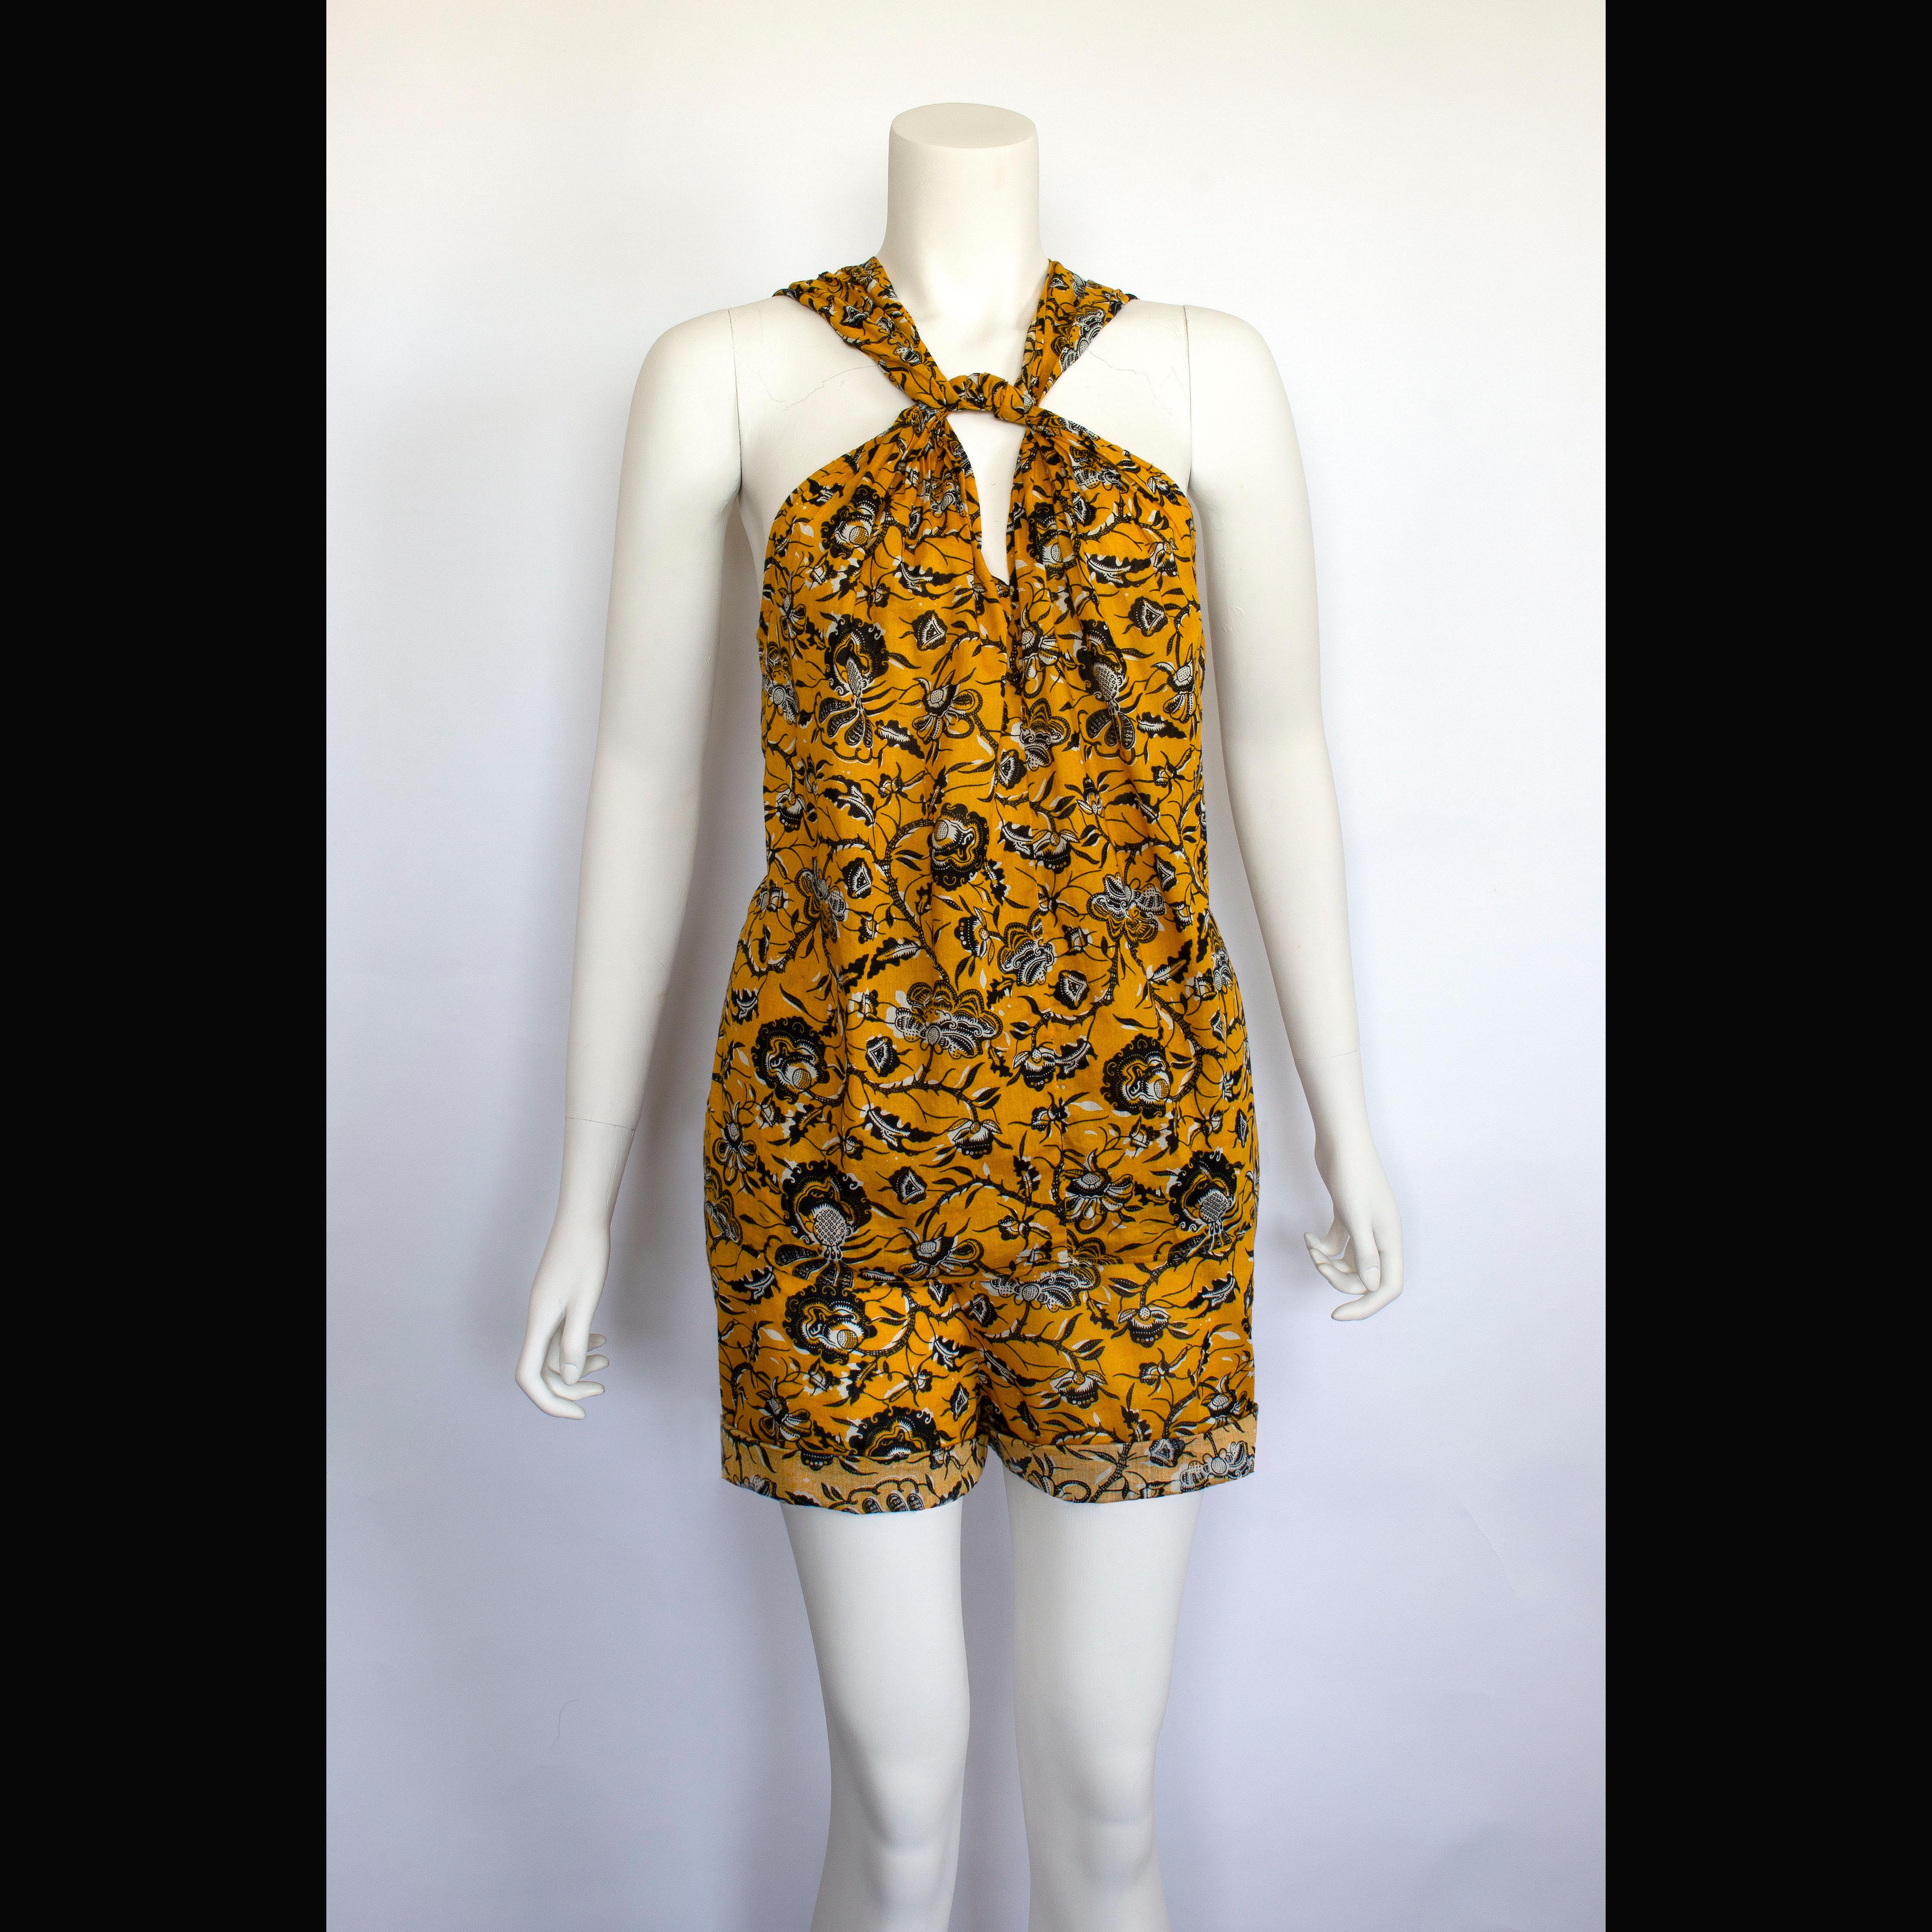 Product Details: Isabel Marant Etoile - Halter Top - Yellow, Black + White Floral Print
Label: Isabel Marant Etoile
Fabric Content: Printed Cotton - Yellow, Black + White Floral Print 
Size: Halter Top: FR 38
Halter Top: FR 38 
Bust Circ (Underarm